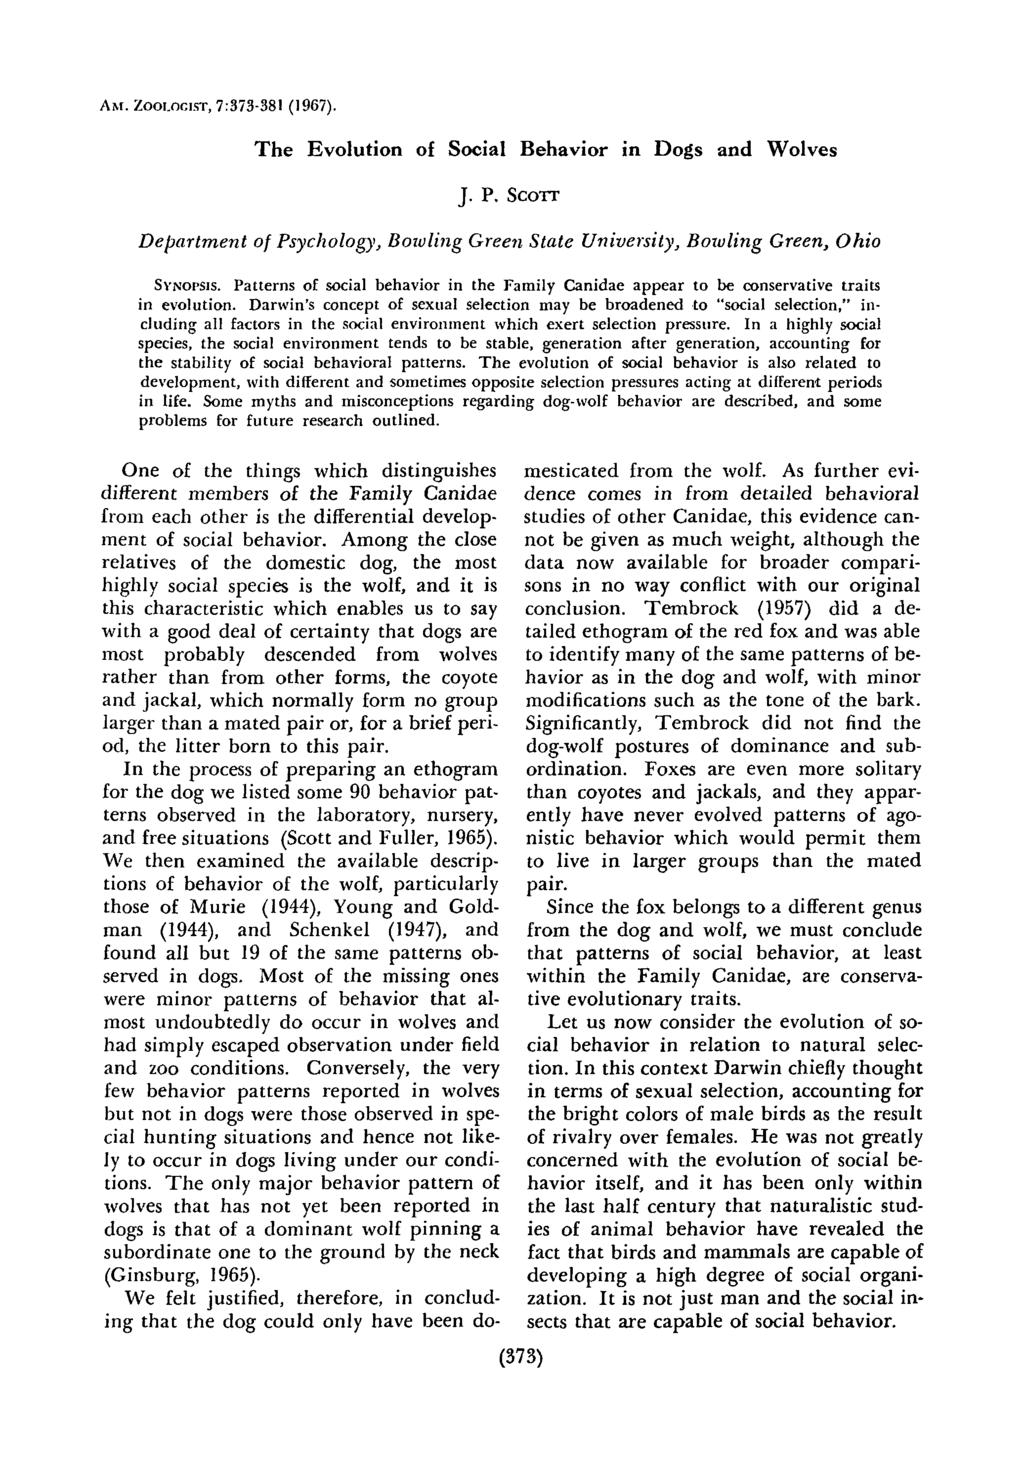 AM. ZOOLOGIST, 7:373-381 (1967). The Evolution of Social Behavior in Dogs and Wolves J. P. SCOTT Department of Psychology, Boioling Green State University, Bowling Green, Ohio SYNOPSIS.